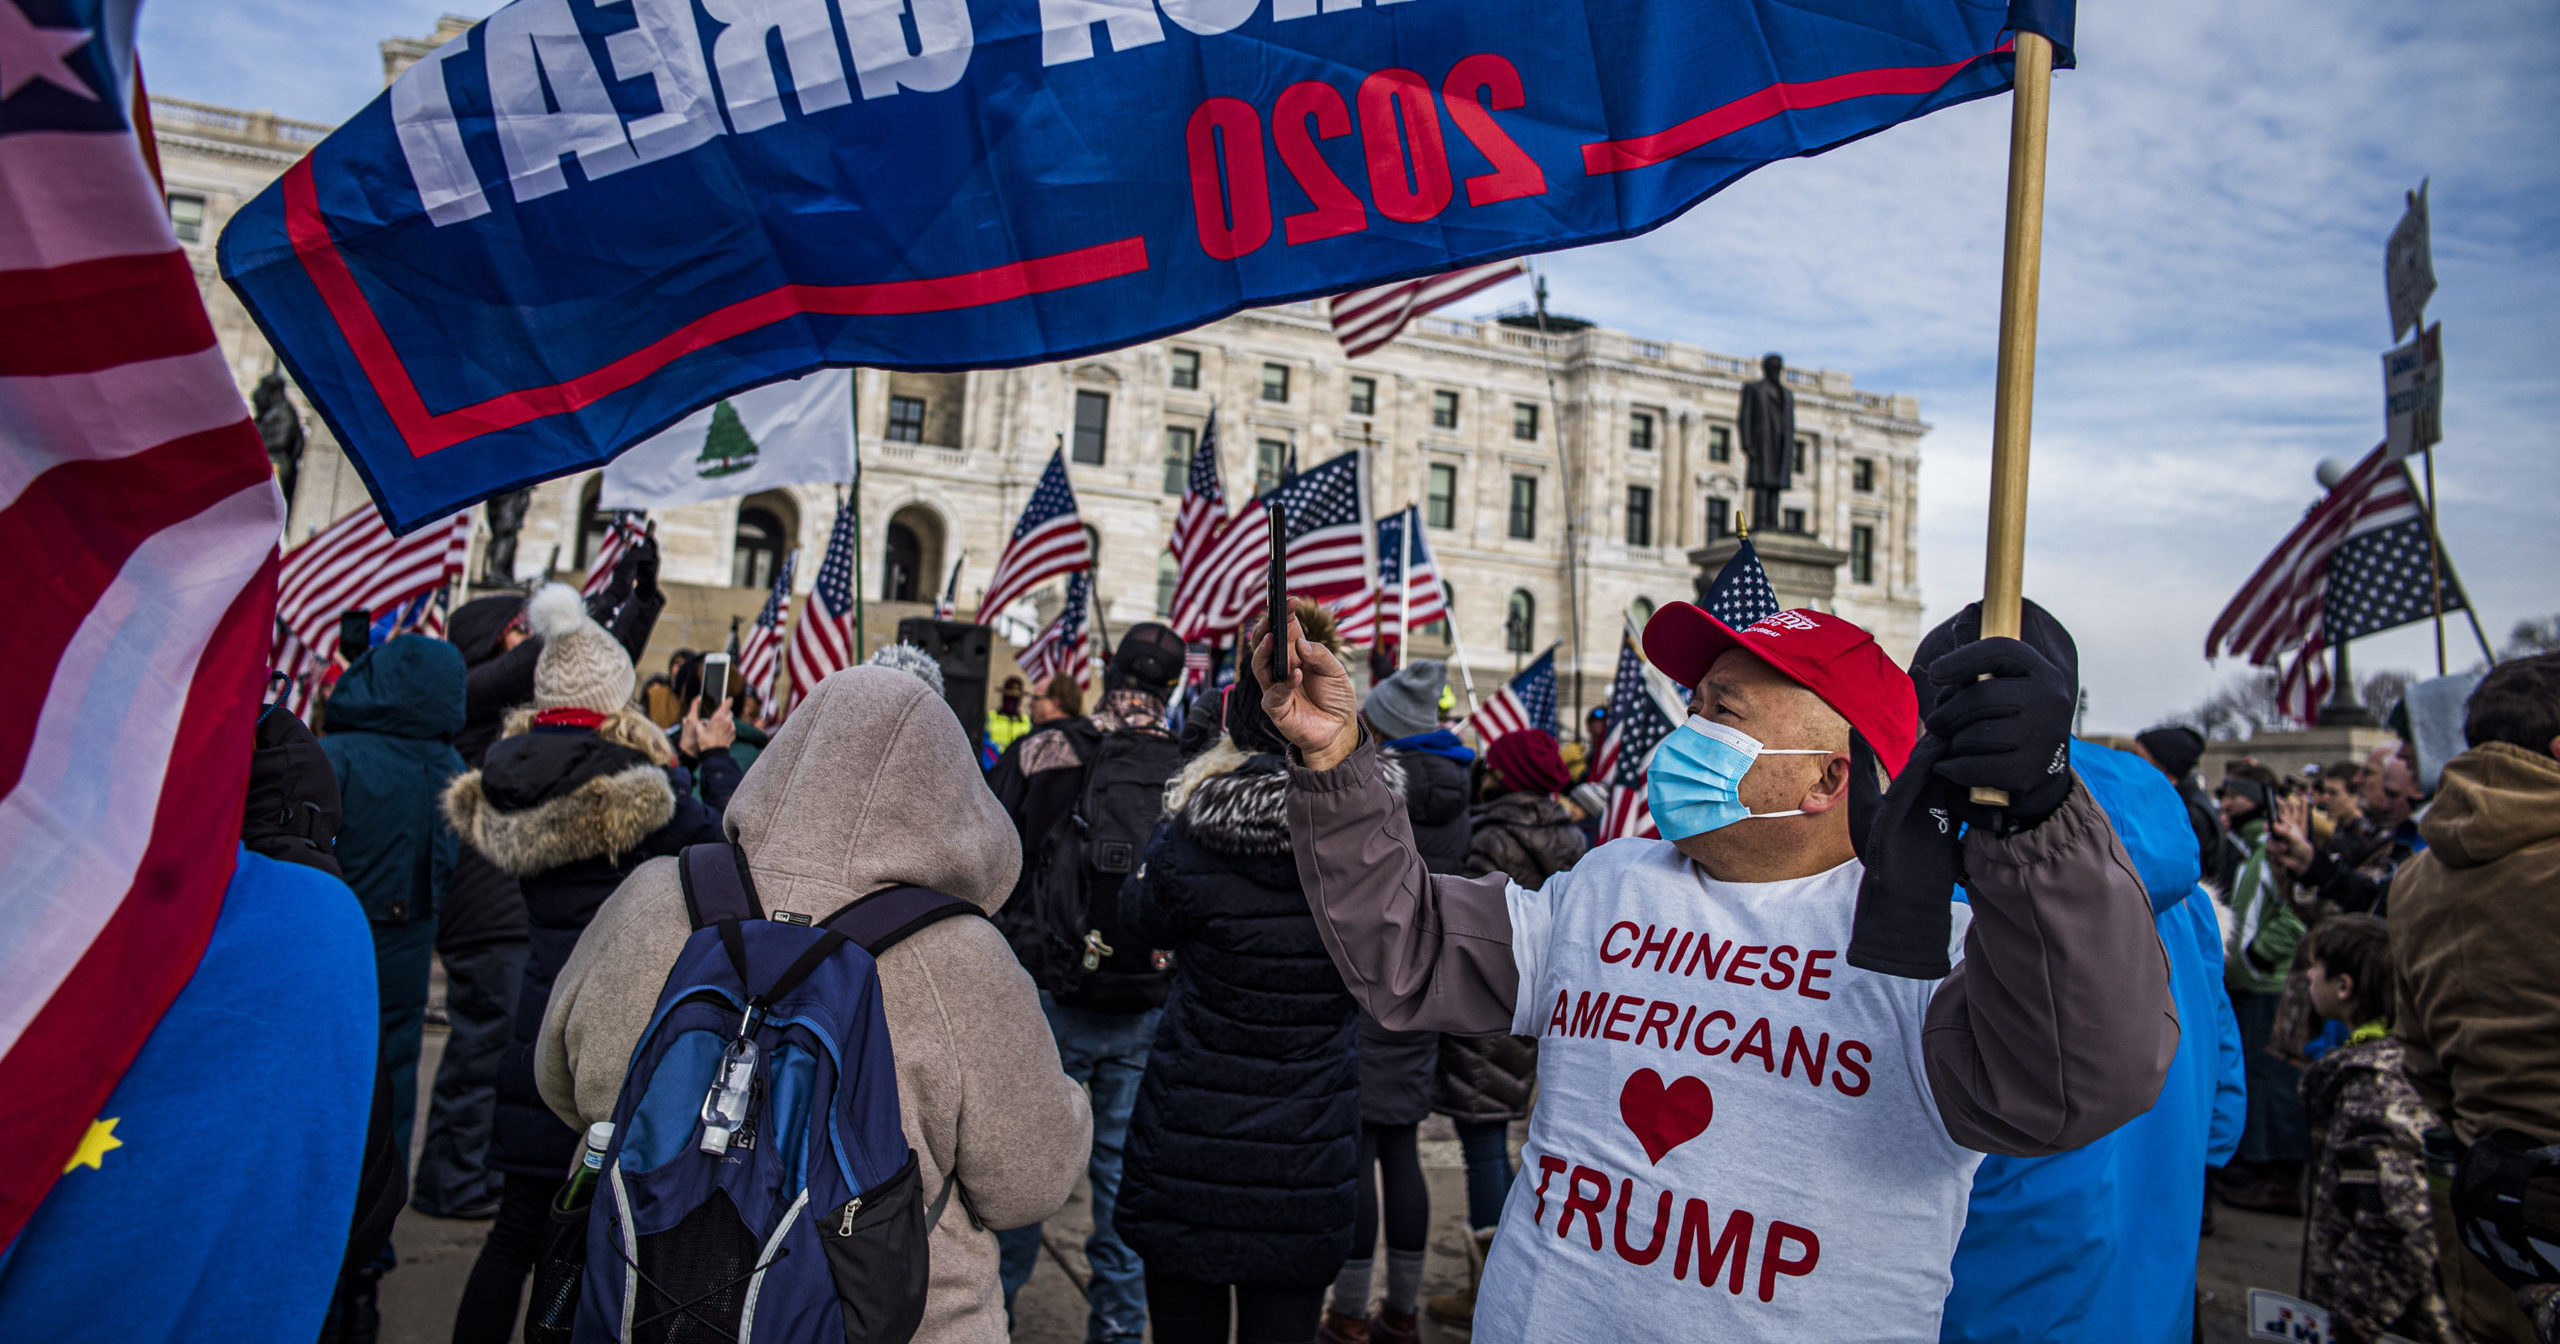 Protesters attended a rally in support of President Donald Trump on the steps of the Minnesota State Capitol on Jan. 6, 2021, in St. Paul, Minnesota.